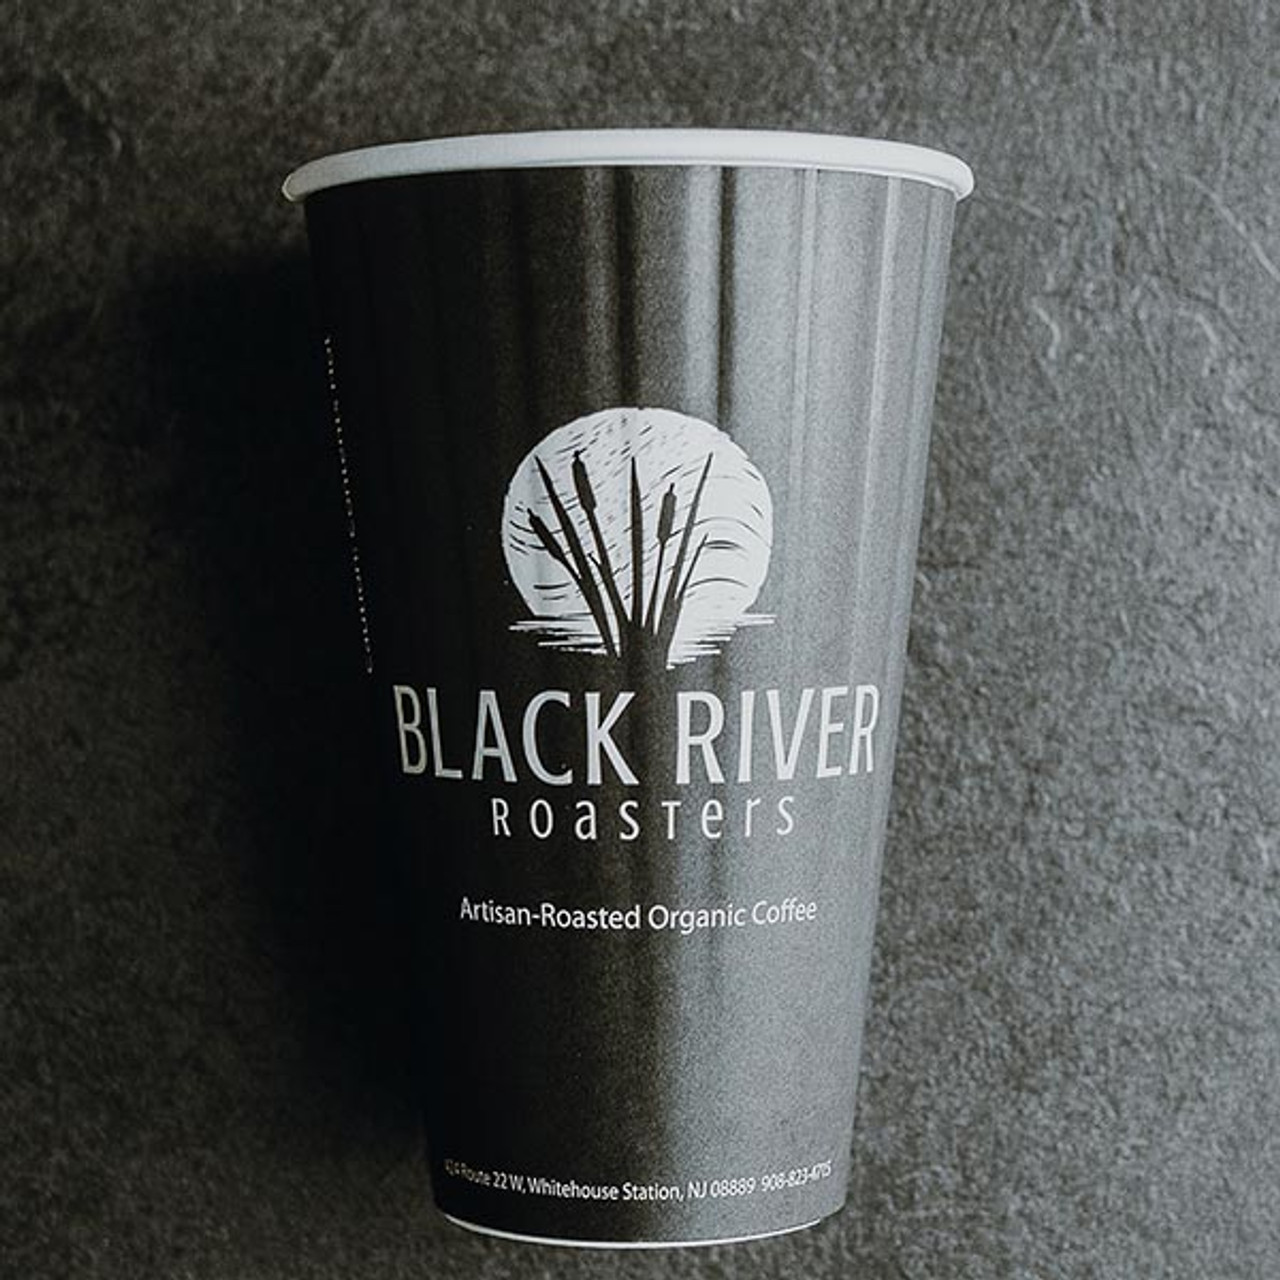 12 oz. Custom Printed Recyclable Double Walled Paper Cup 600/Case